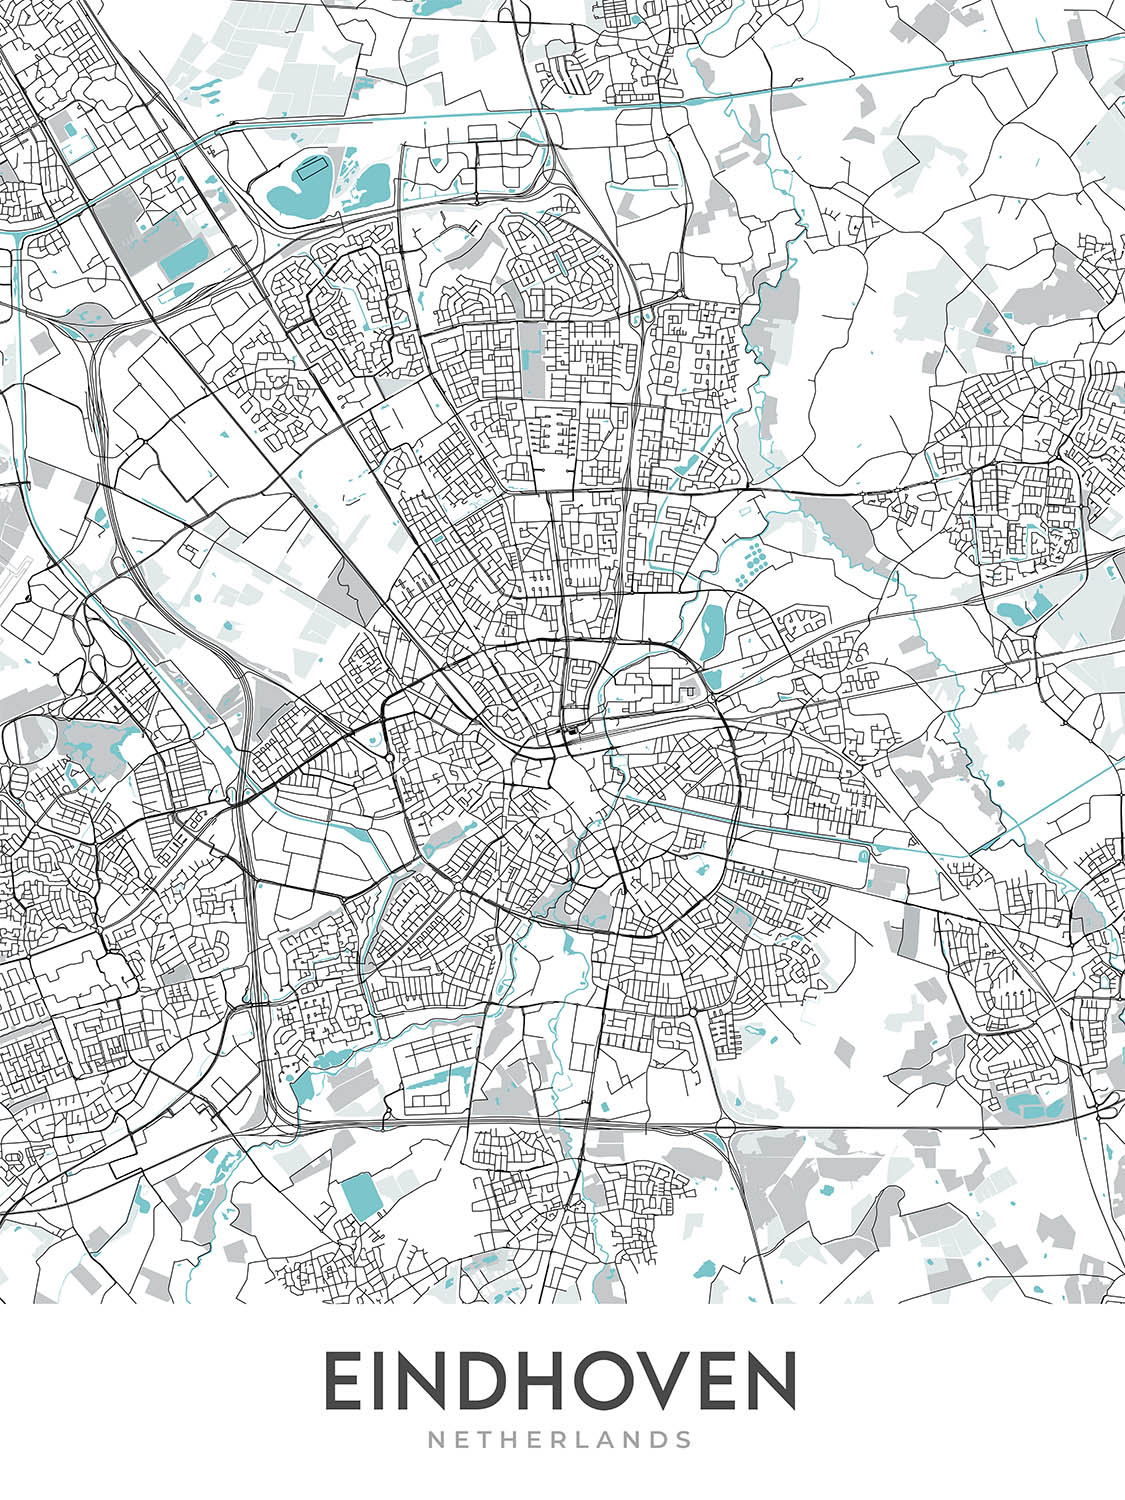 Modern City Map of Eindhoven, Netherlands: Centrum, Philips Stadion, A2, A67, Tongelre